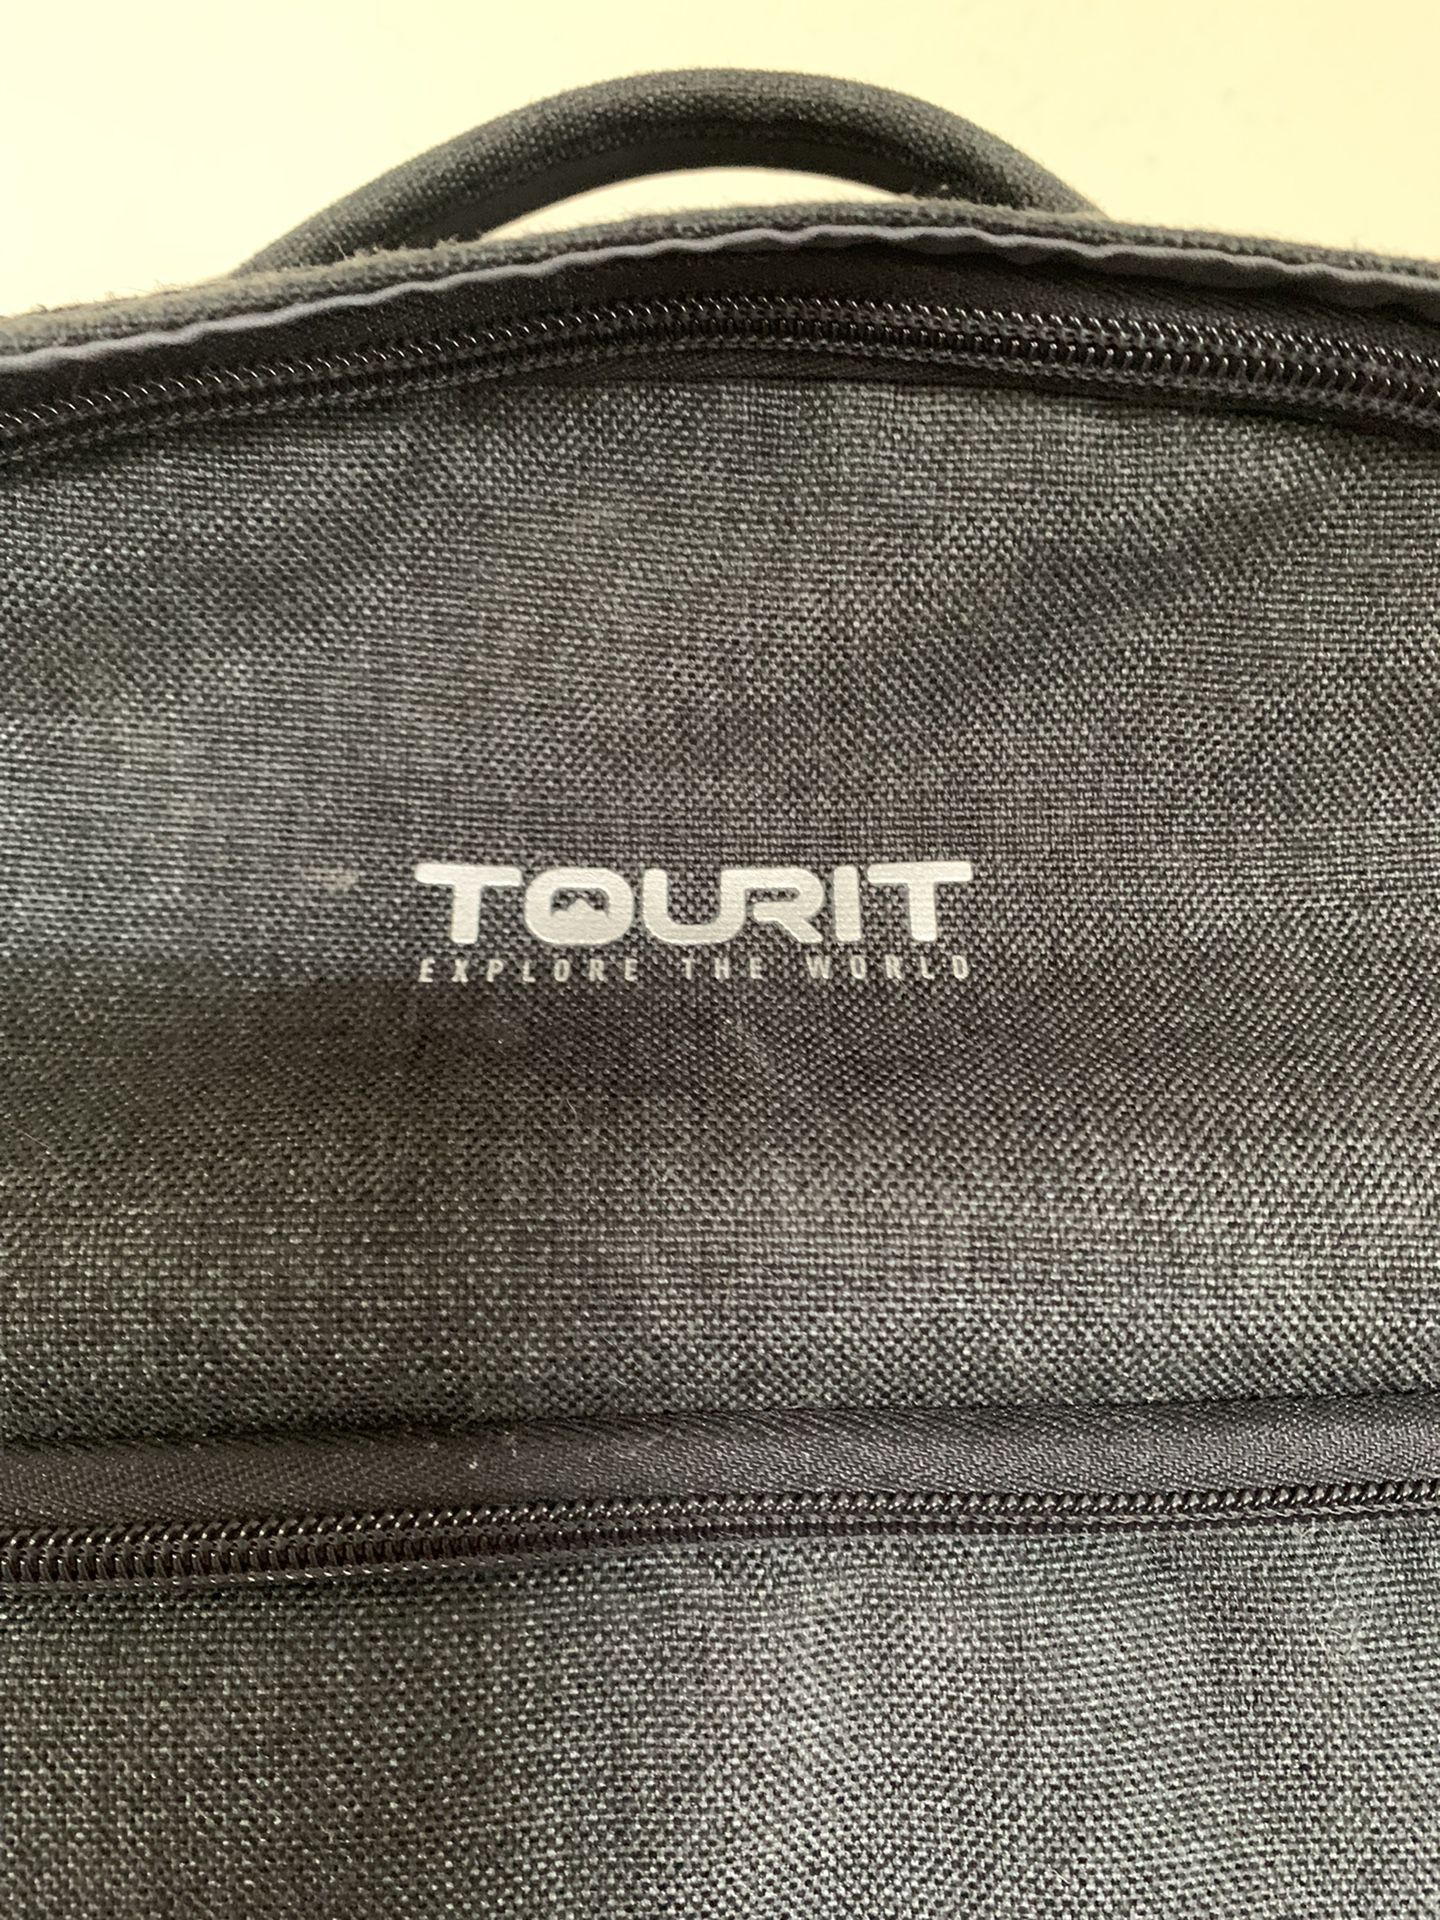 TOURIT Insulated Cooler Backpack- Lightweight, leakproof, holds 28 cans (GREAT CONDITION)